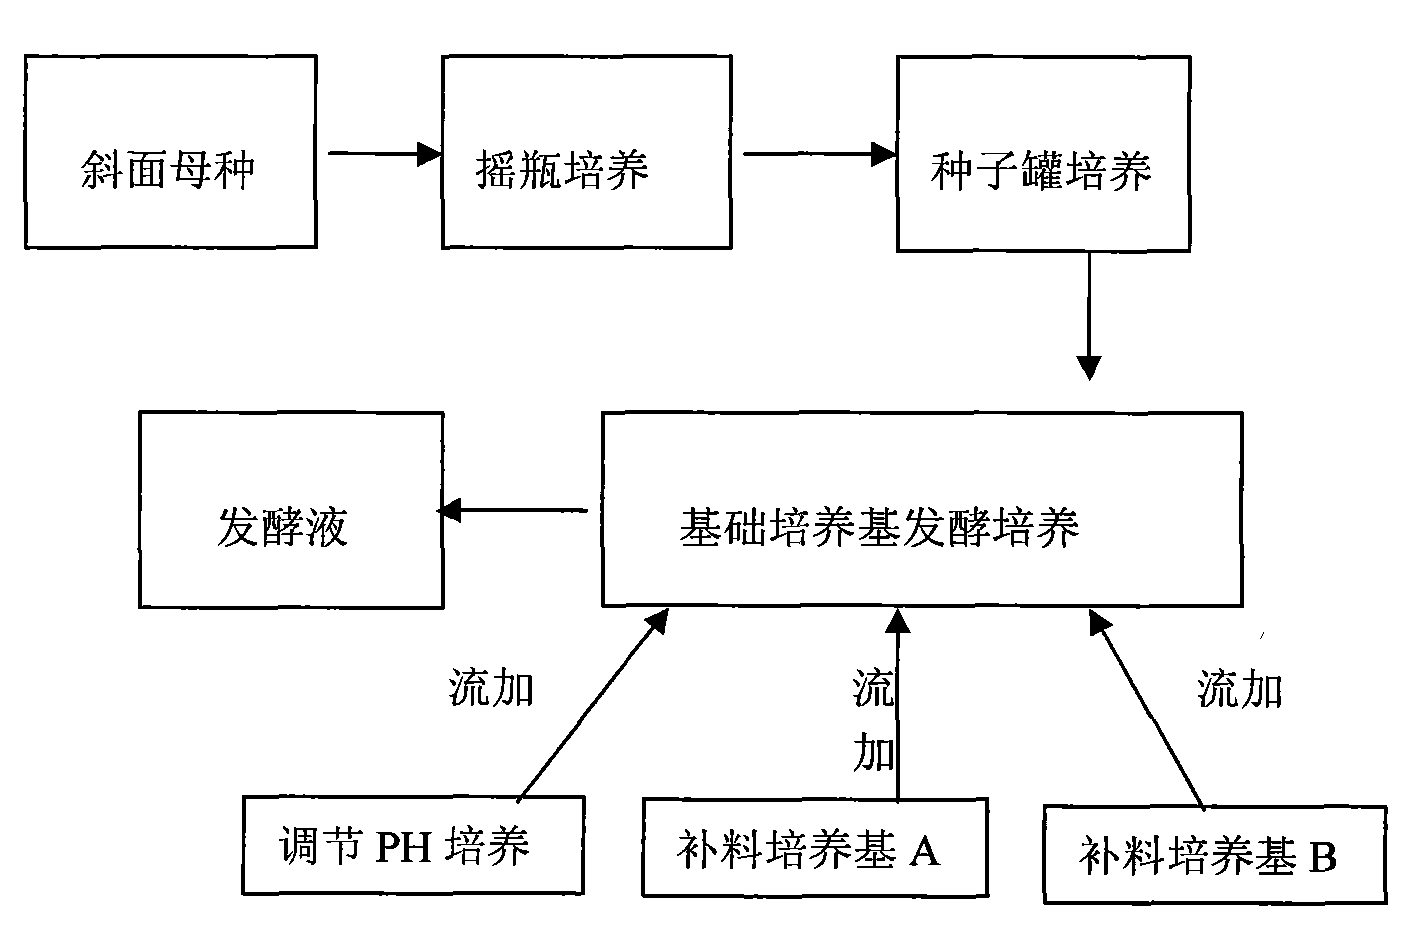 Fermentation method for producing high viscocity xanthan gum by xanthomonas campestris